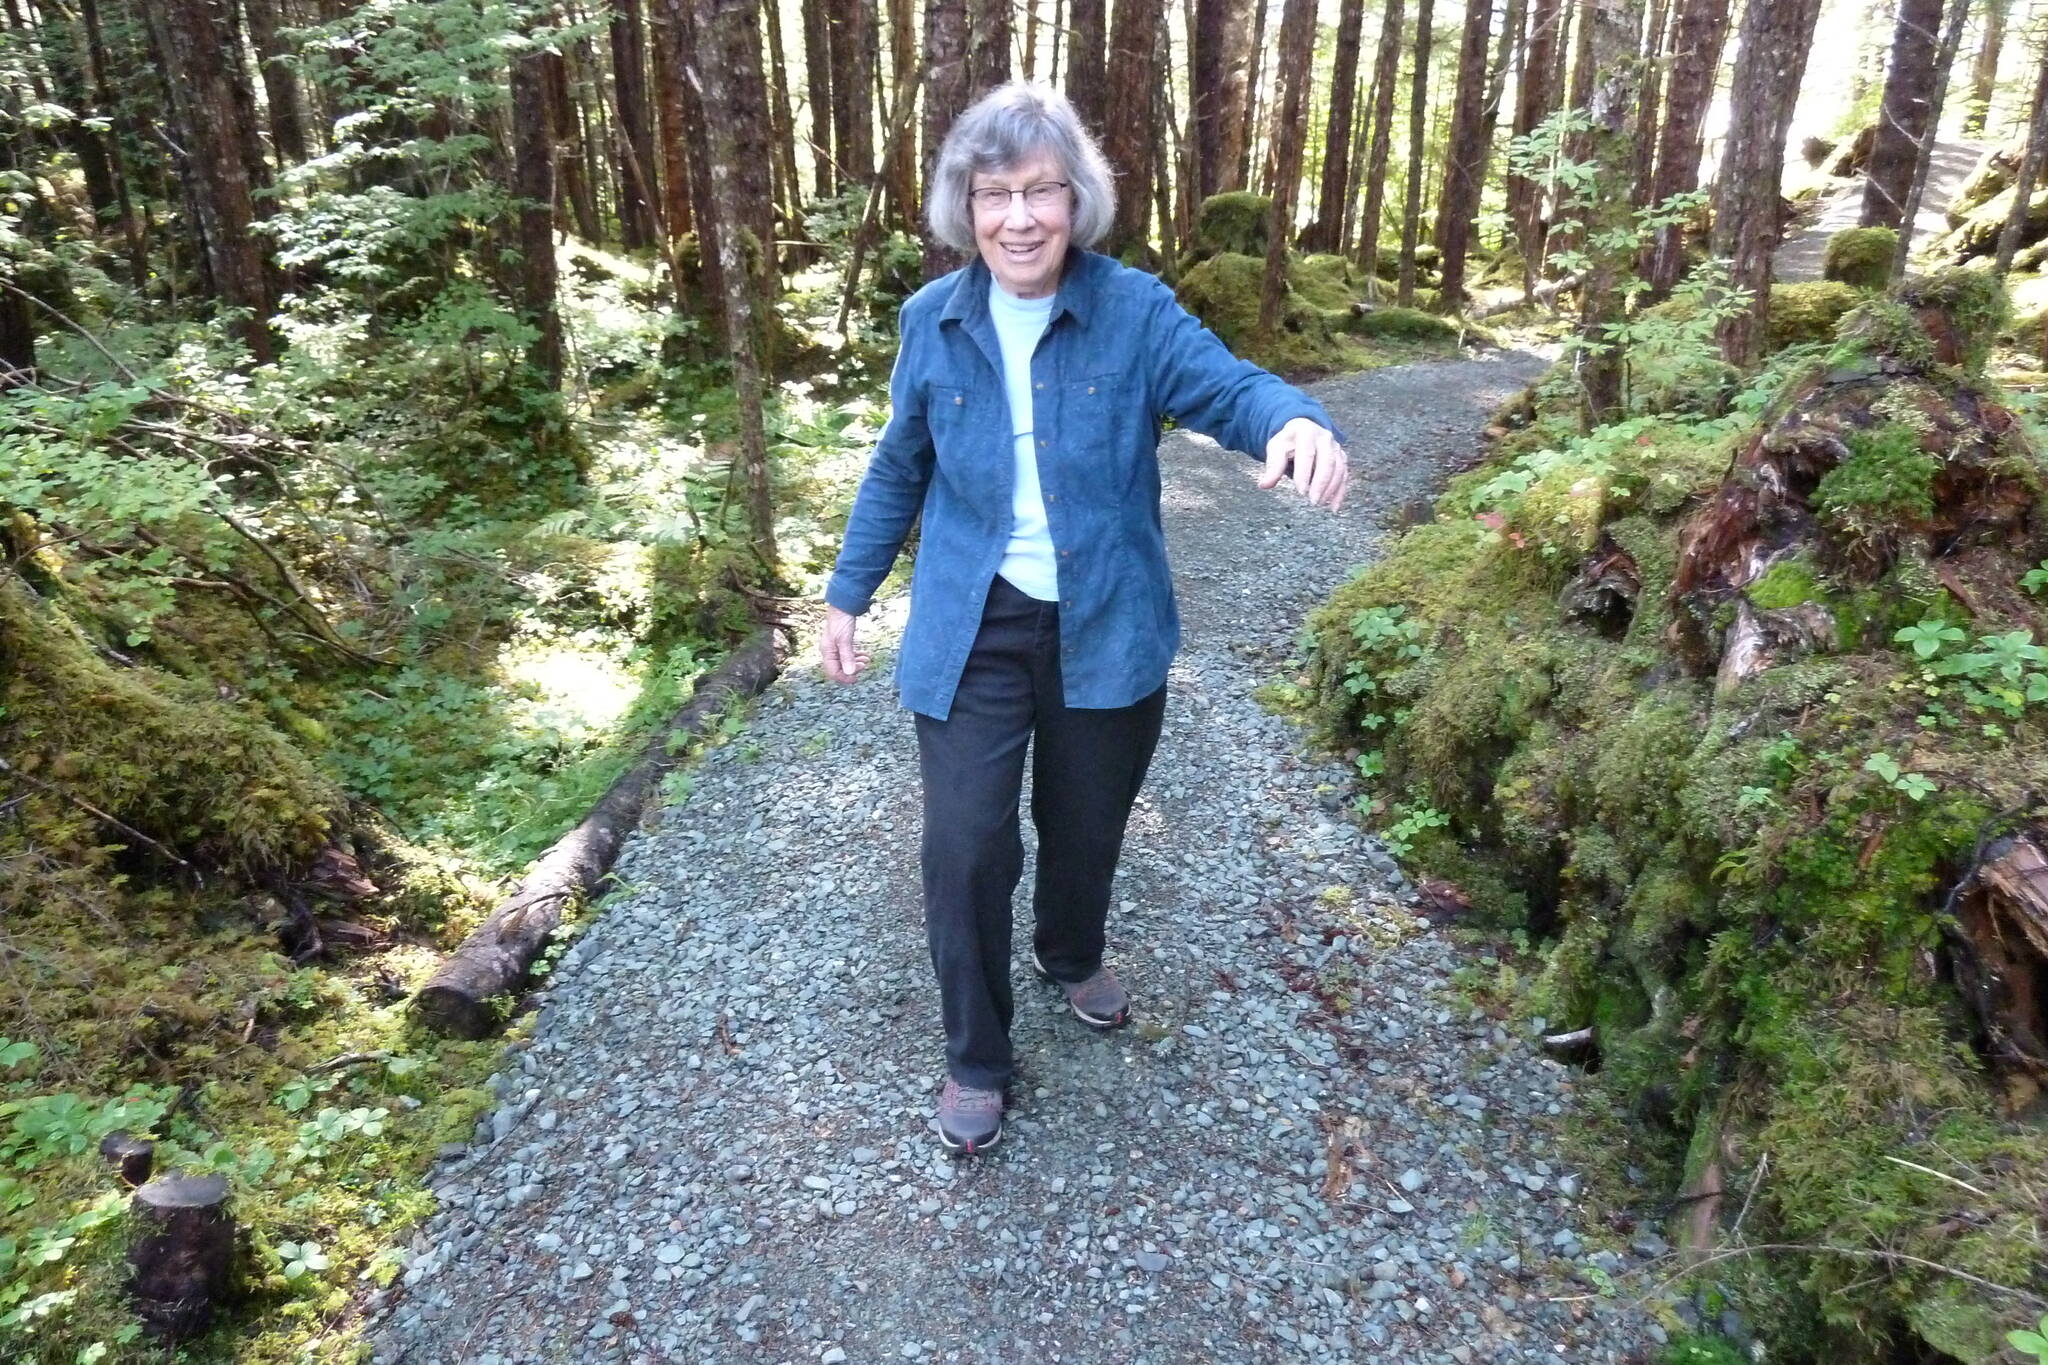 Courtesy Photo / King family 
This photo shows Mary Lou King on the trail after being inducted into the Alaska Women’s Hall of Fame in 2018.